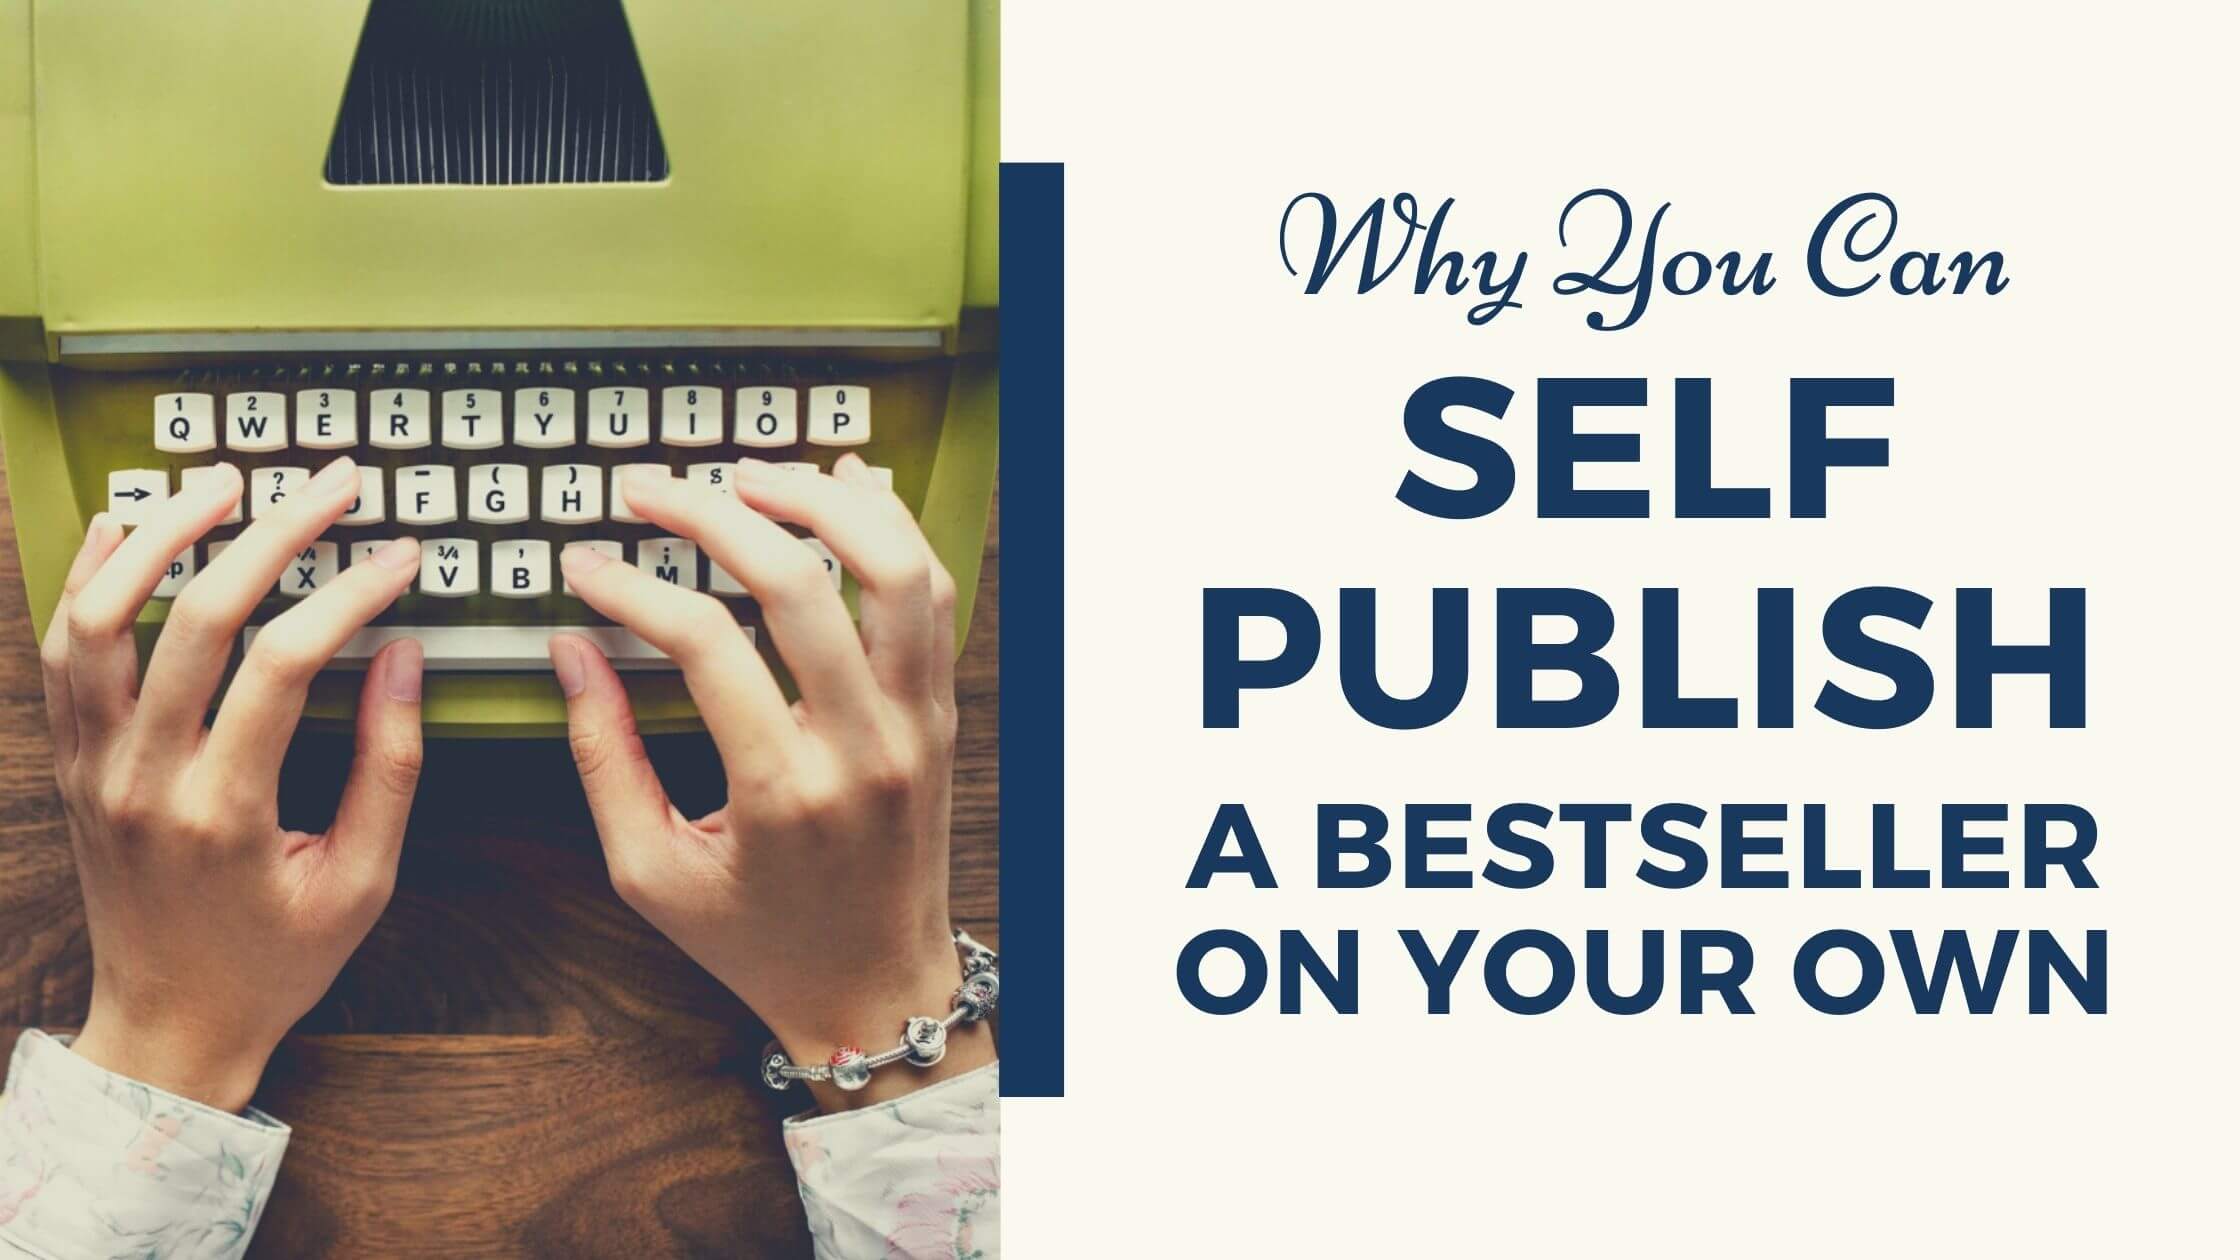 Why You Can Self Publish a Bestseller on Your Own